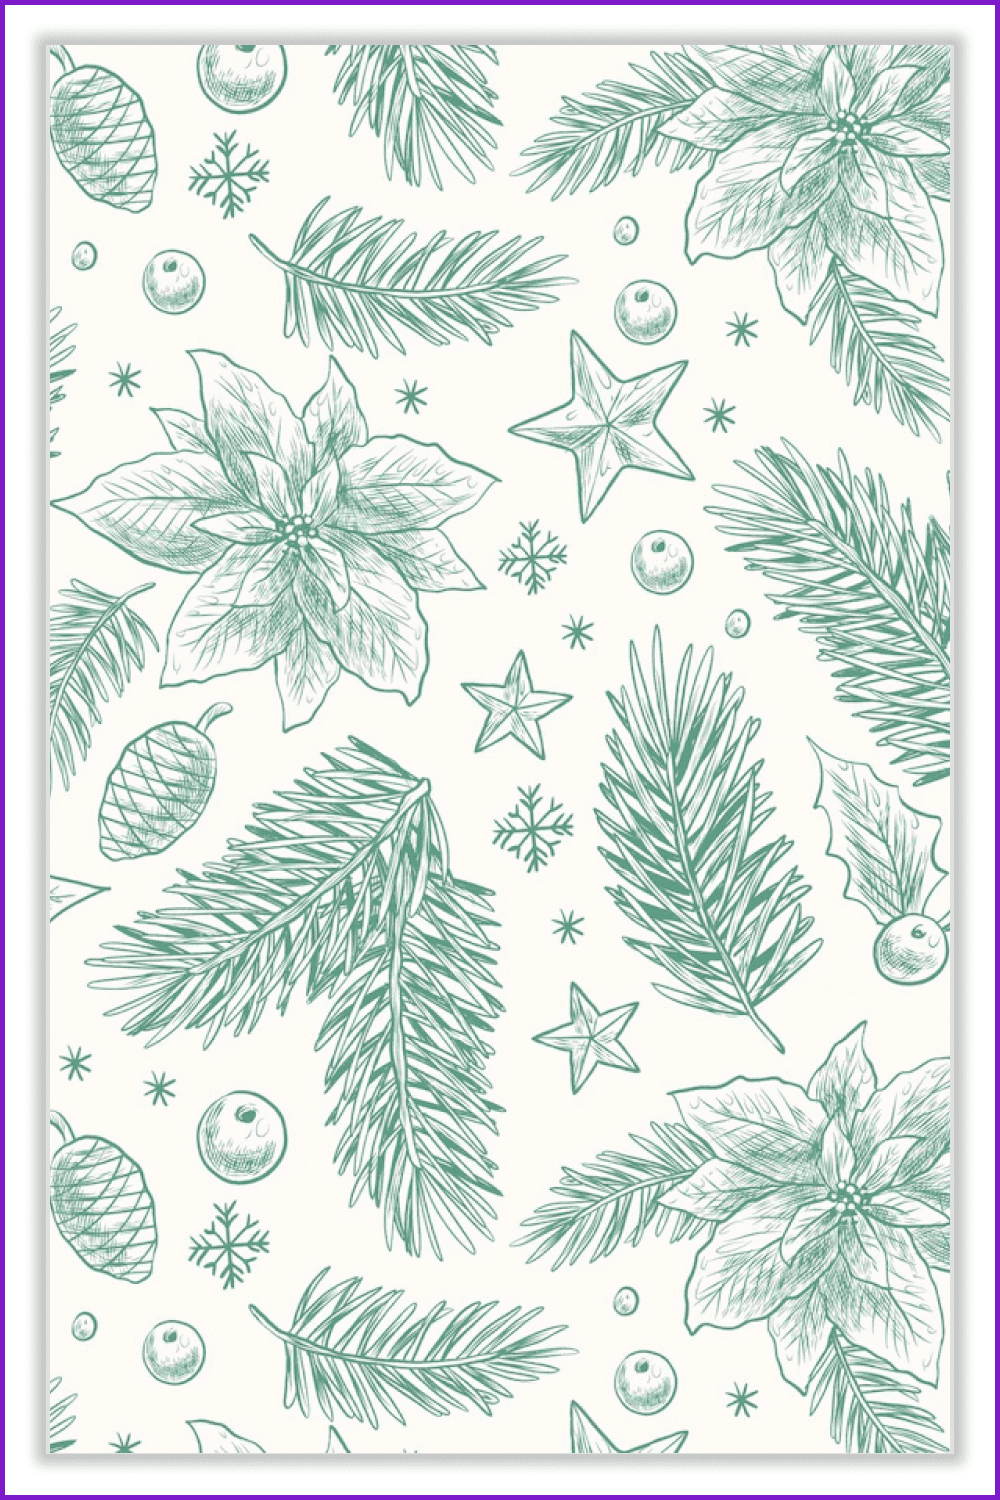 Realistic hand-drawn Christmas pattern with spruce branches, cones, stars.